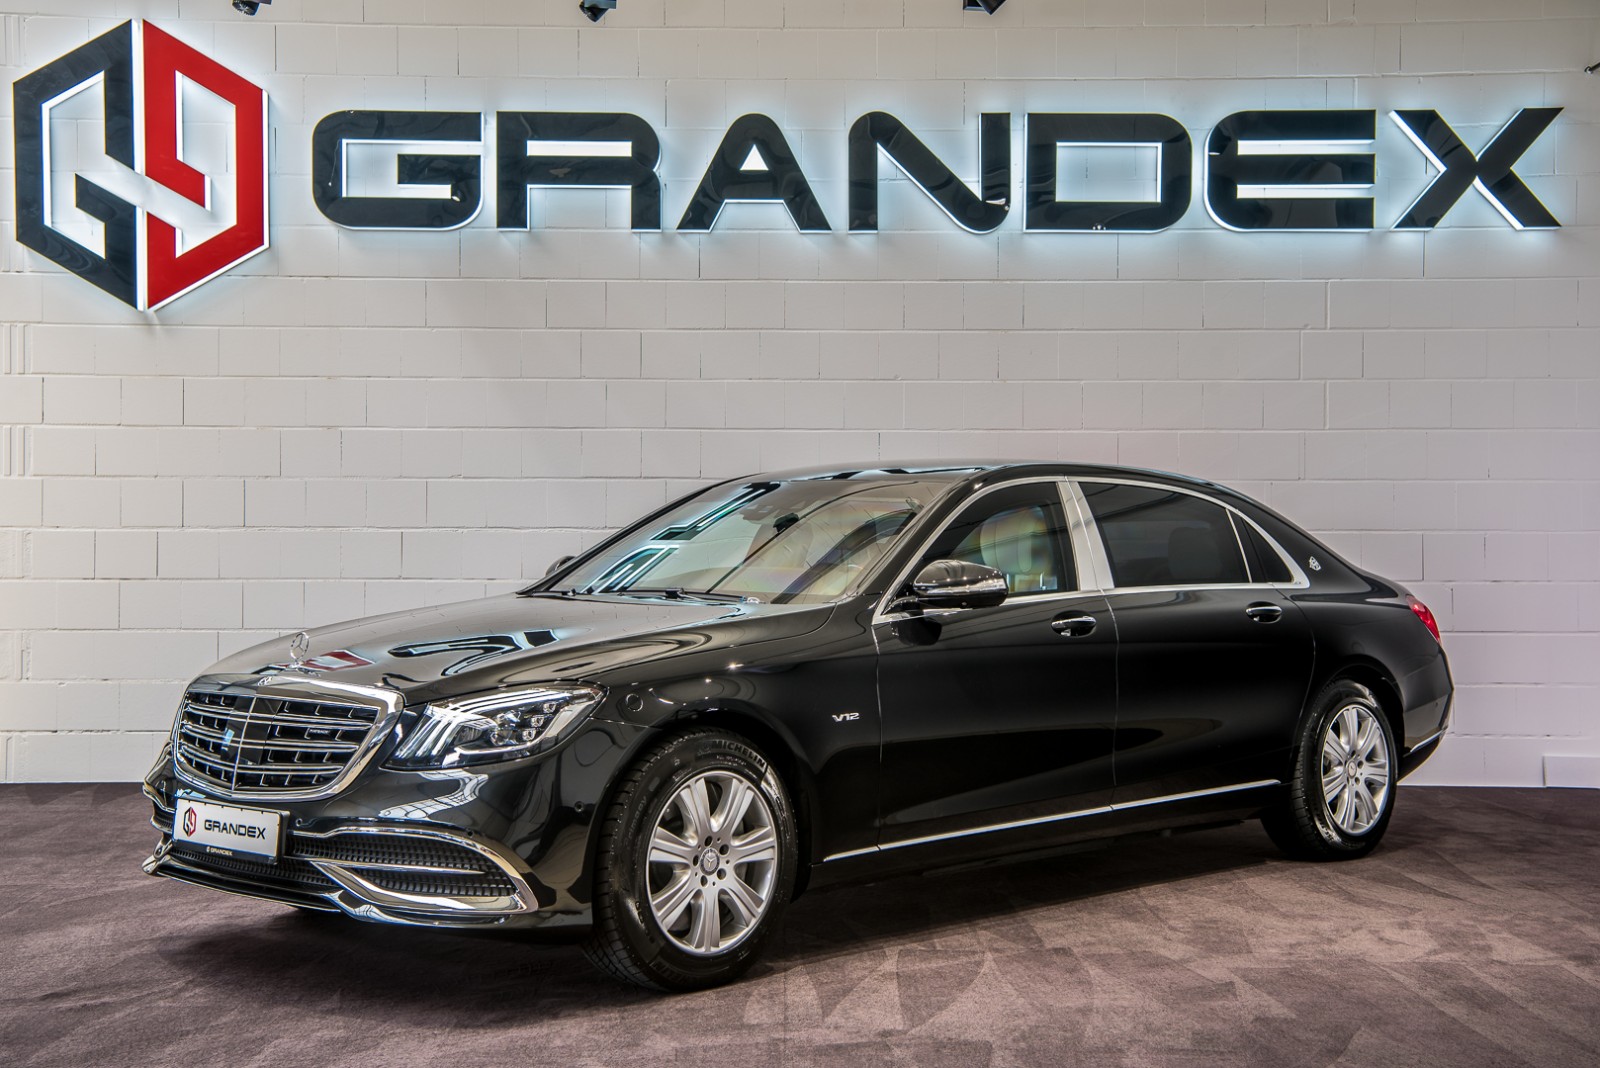 2019 Mercedes Maybach S 650 Guard Vr10 Luxury Pulse Cars Germany For Sale On Luxurypulse